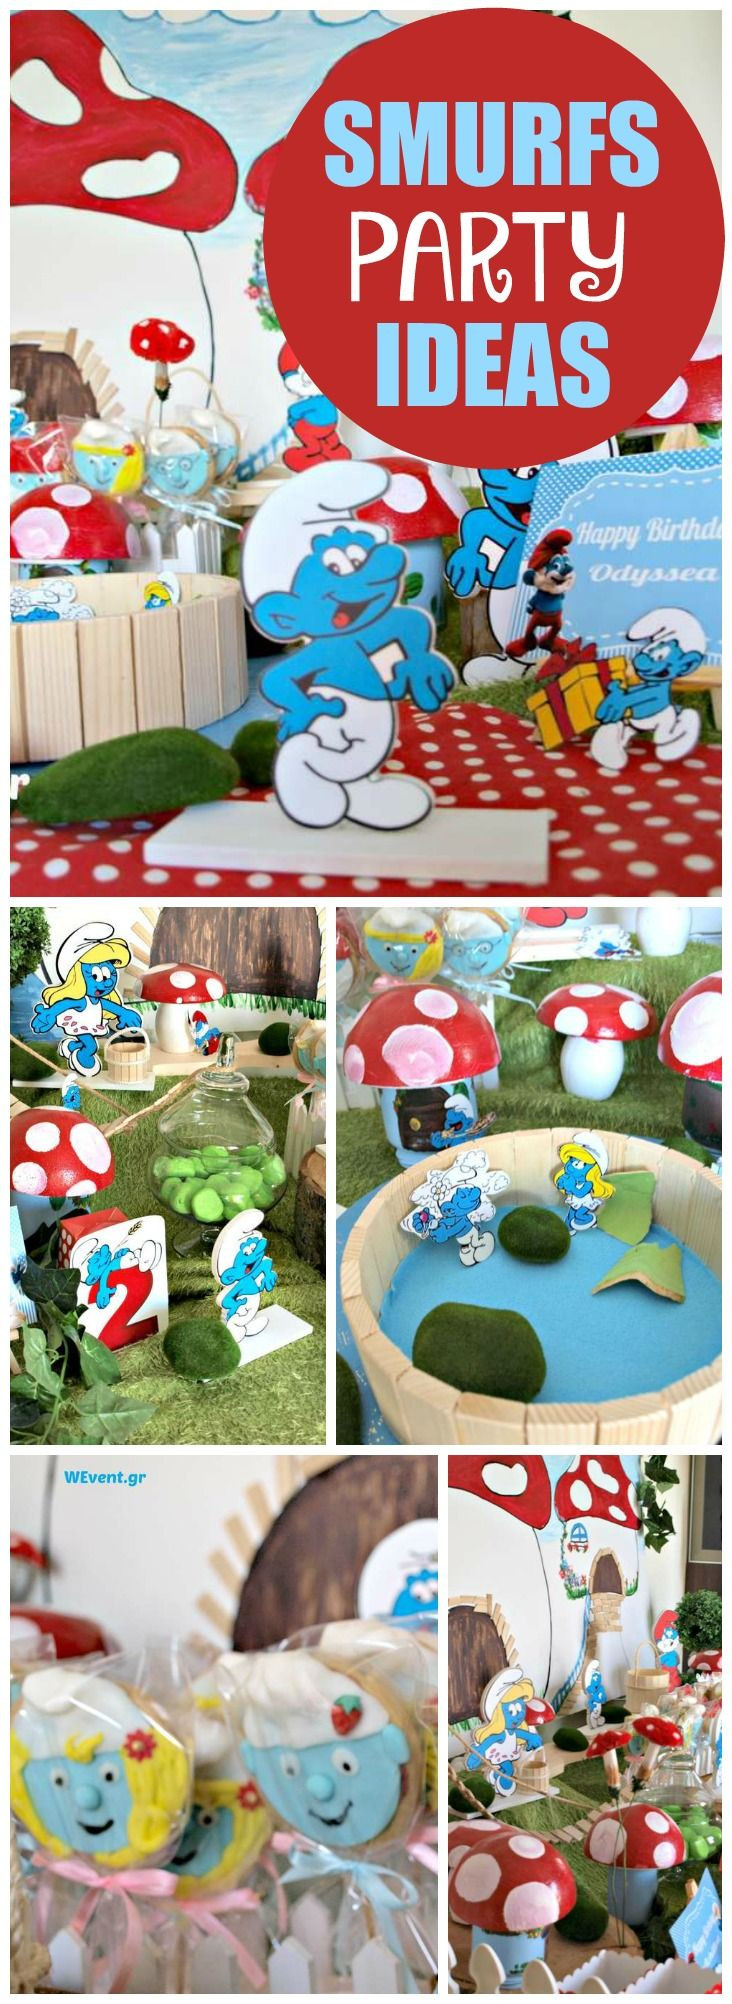 Smurf Birthday Party Ideas
 36 best Smurfs Birthday Party Ideas Decorations and